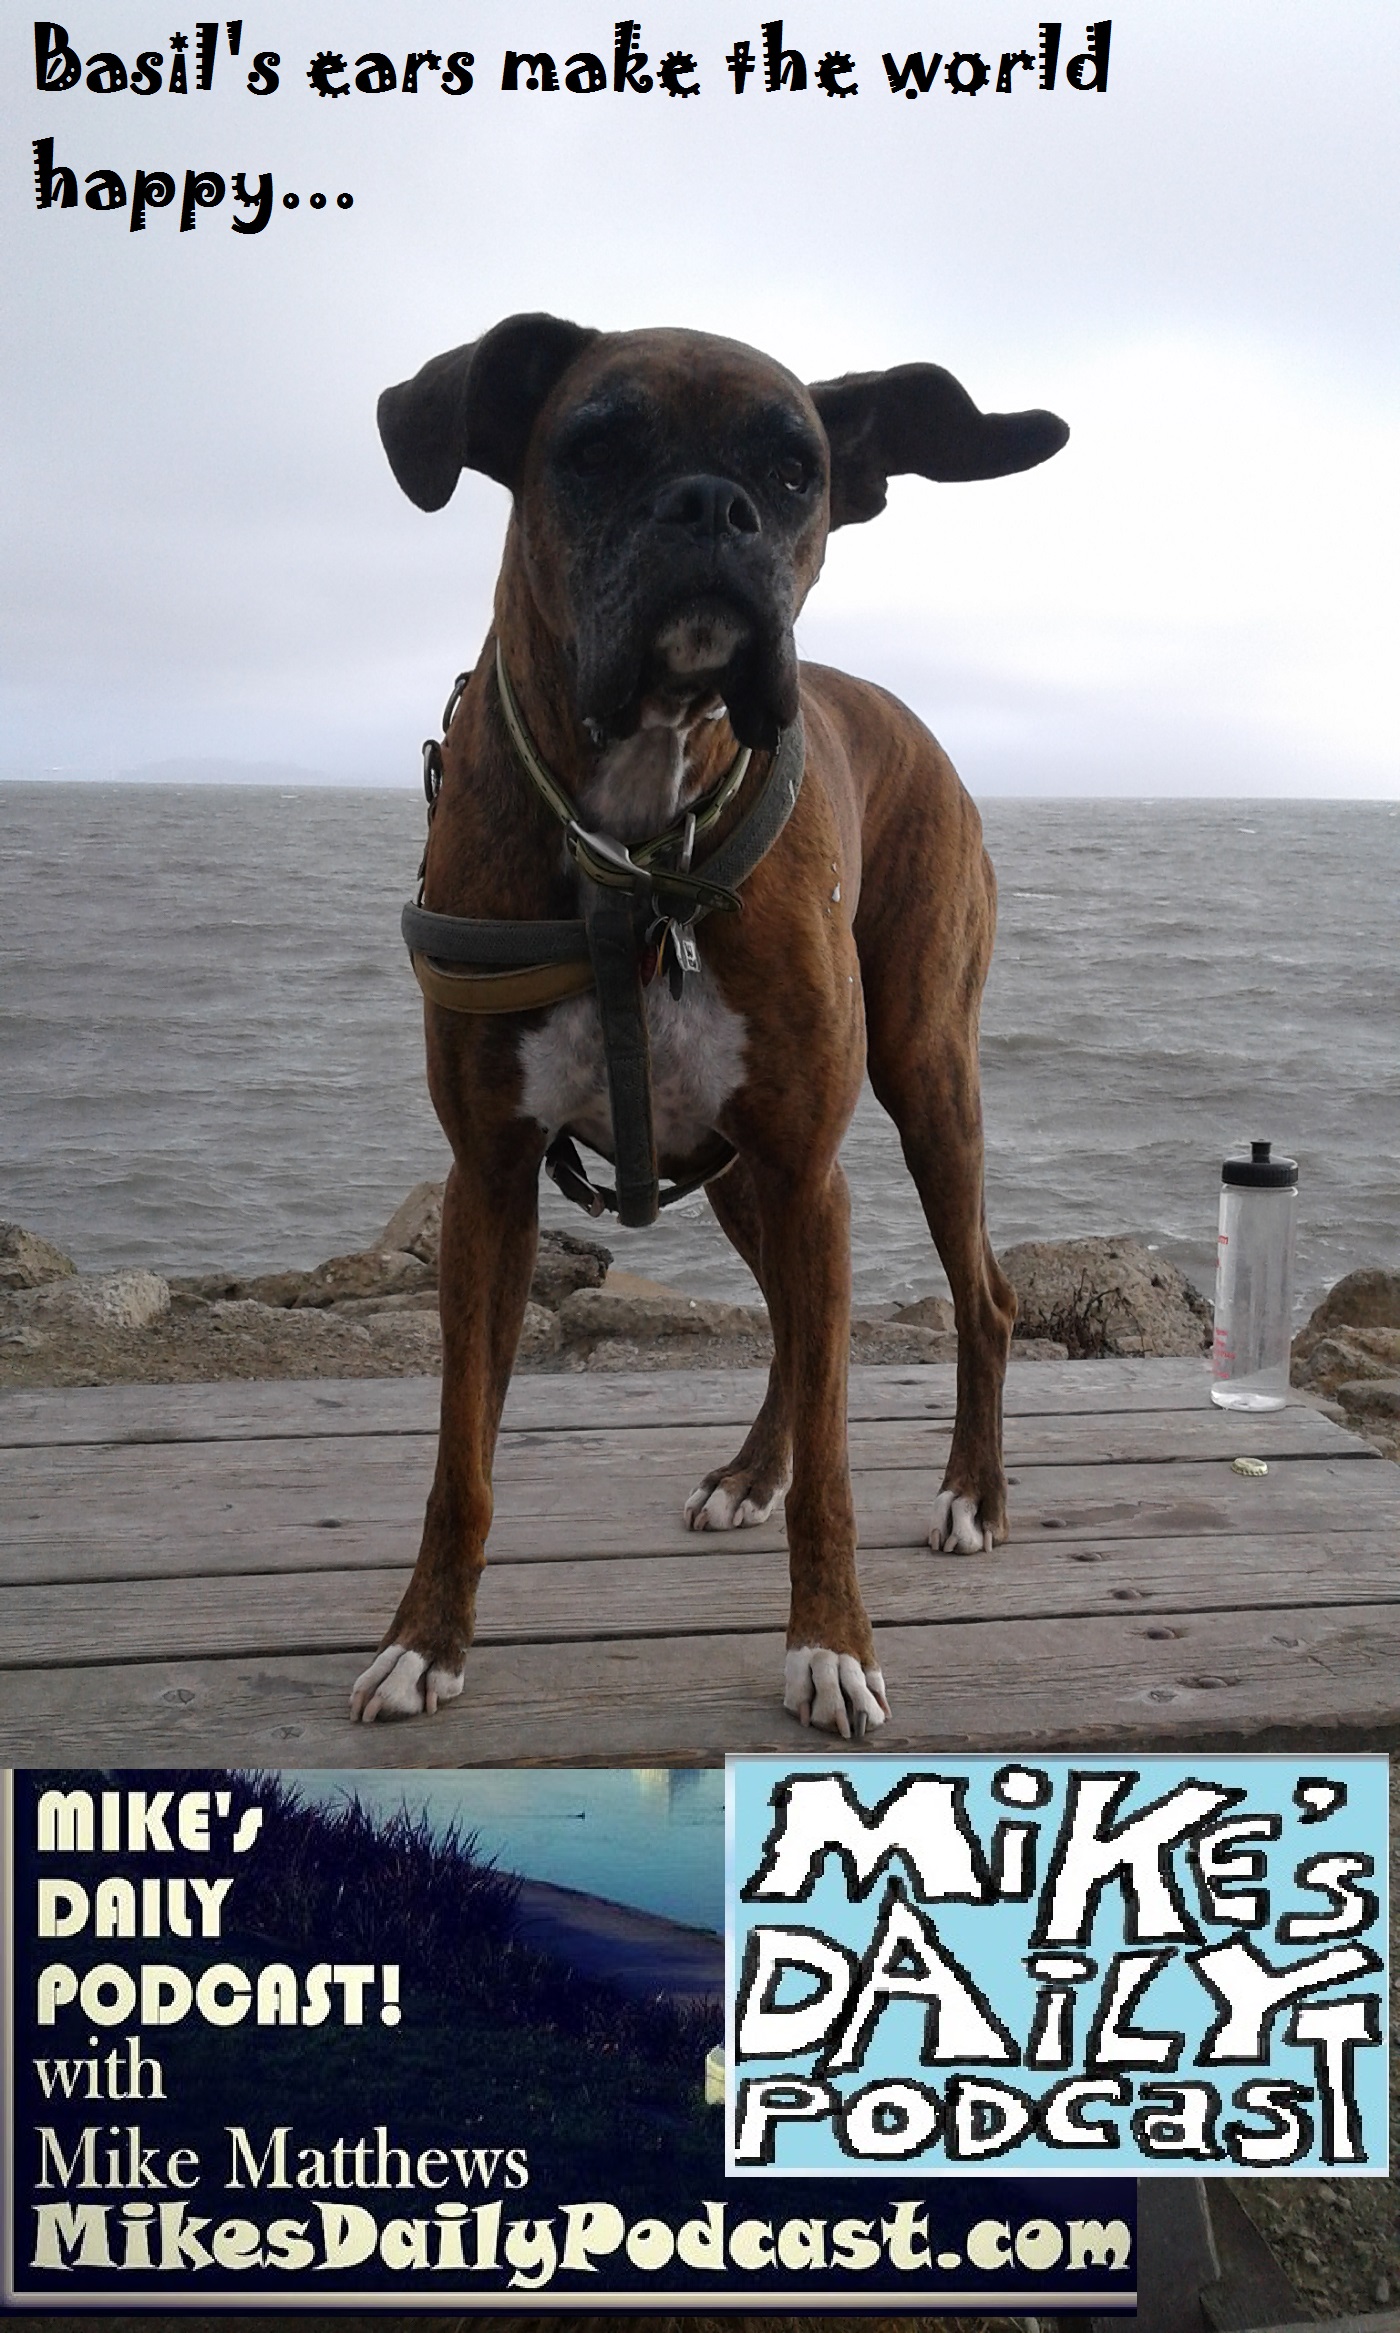 mikes-daily-podcast-1206-boxer-point-isabel-ears